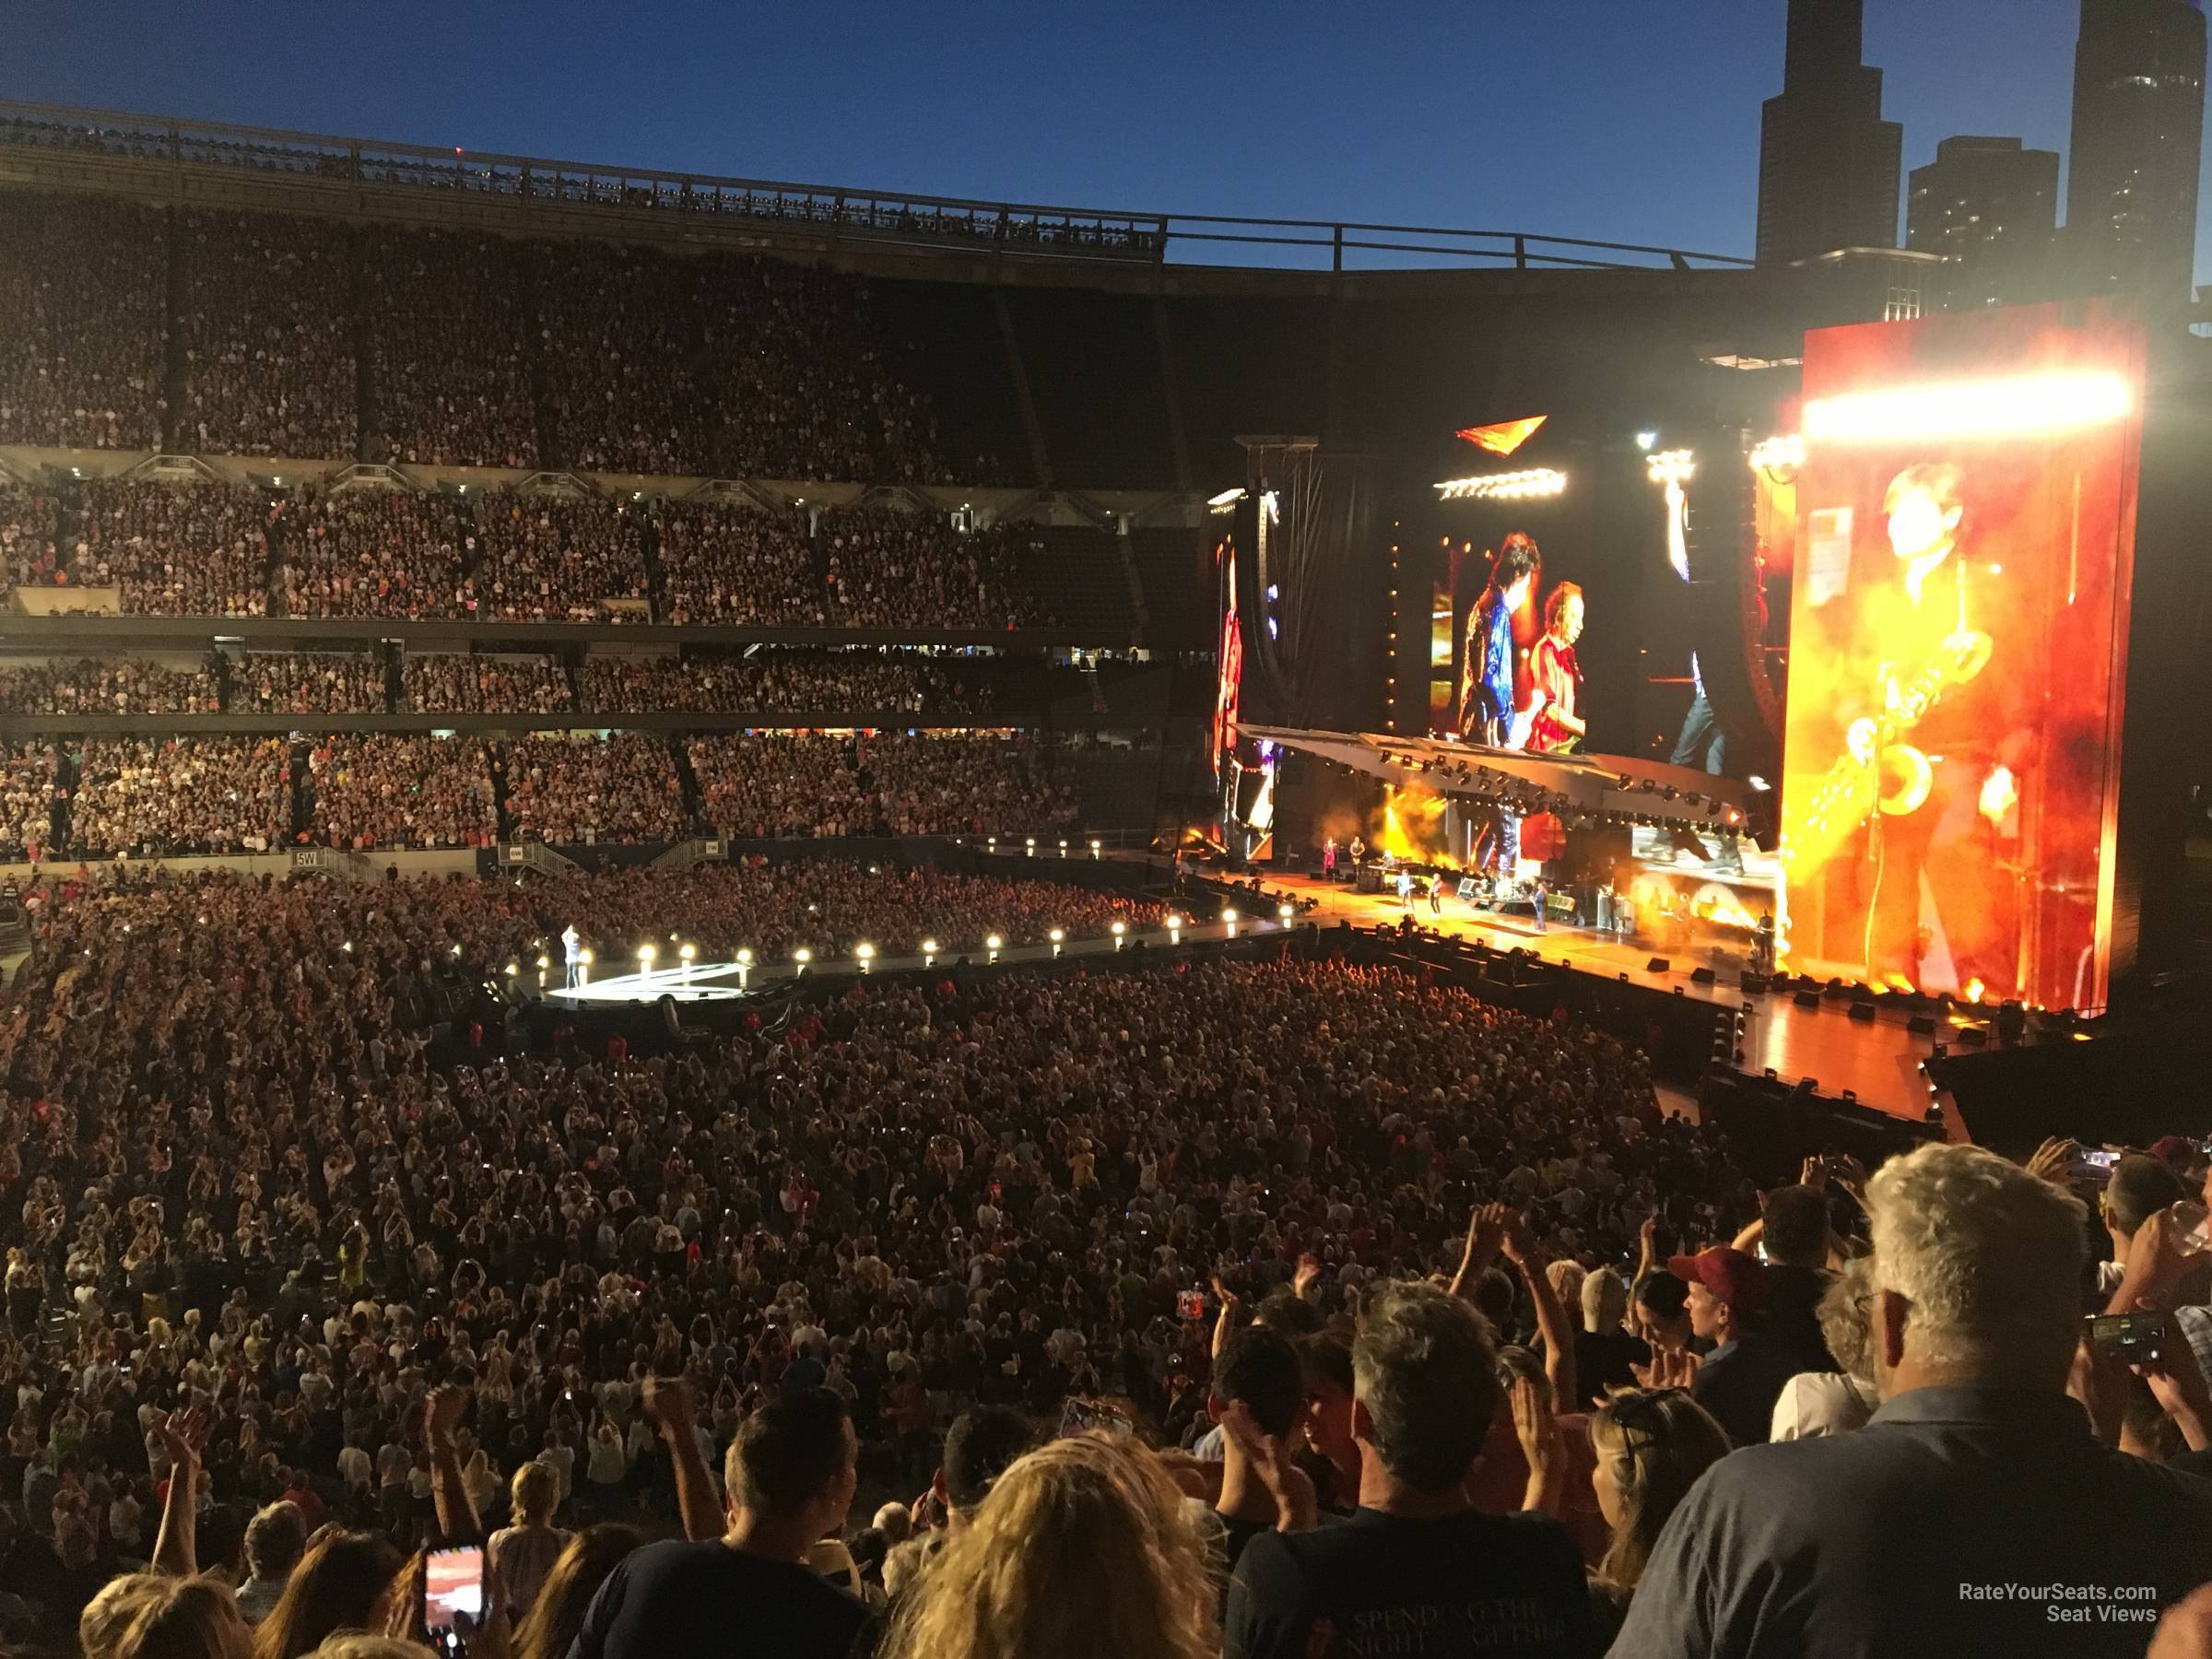 Section 209 at Soldier Field for Concerts